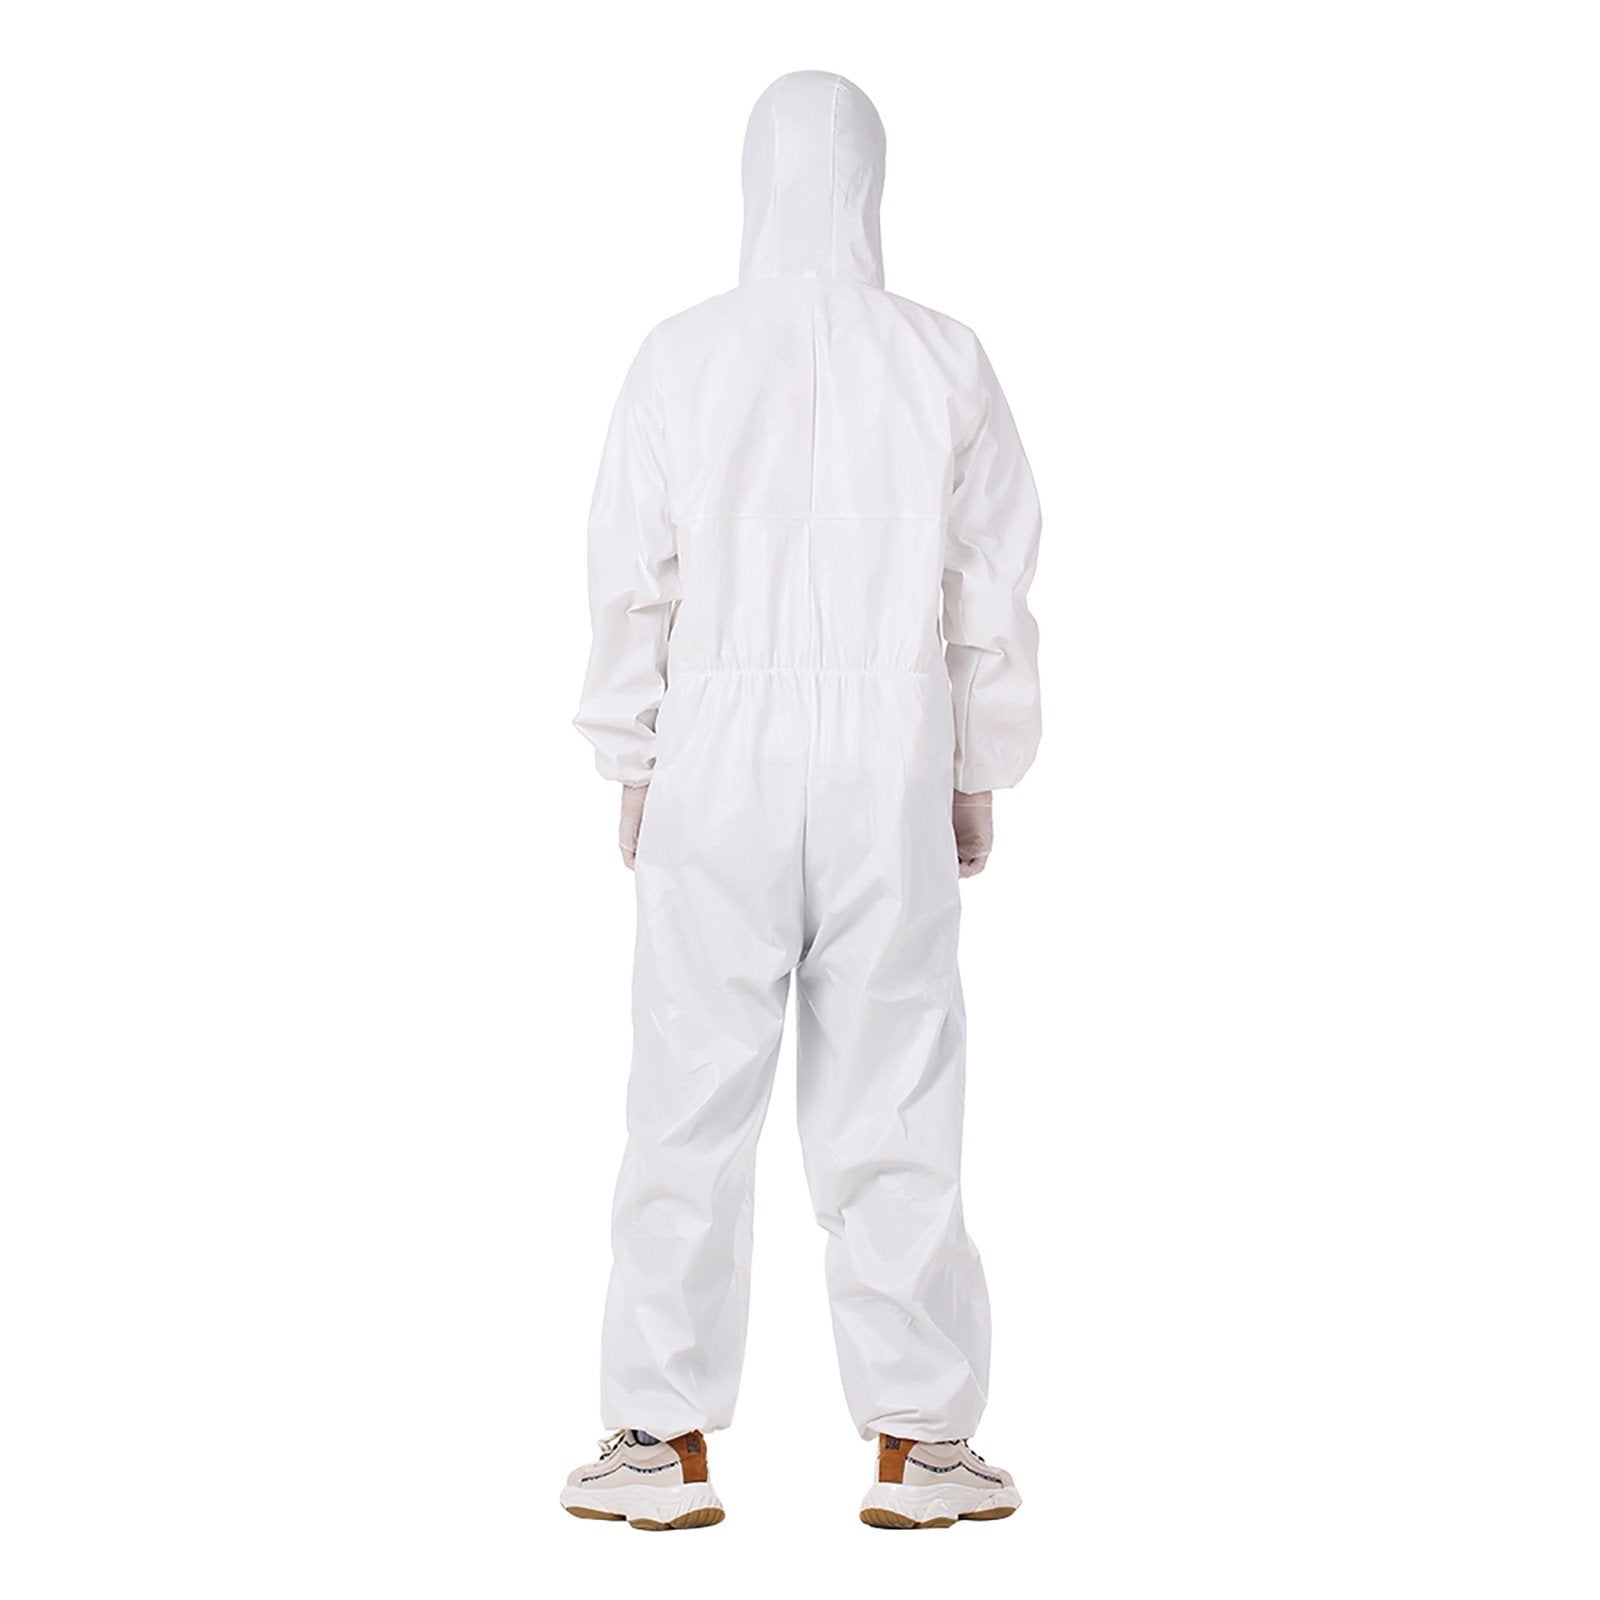 Coverall Disposable Isolation Suit Prevent Invasion for Staff Protective Clothing Dust-proof Coveralls Antistatic